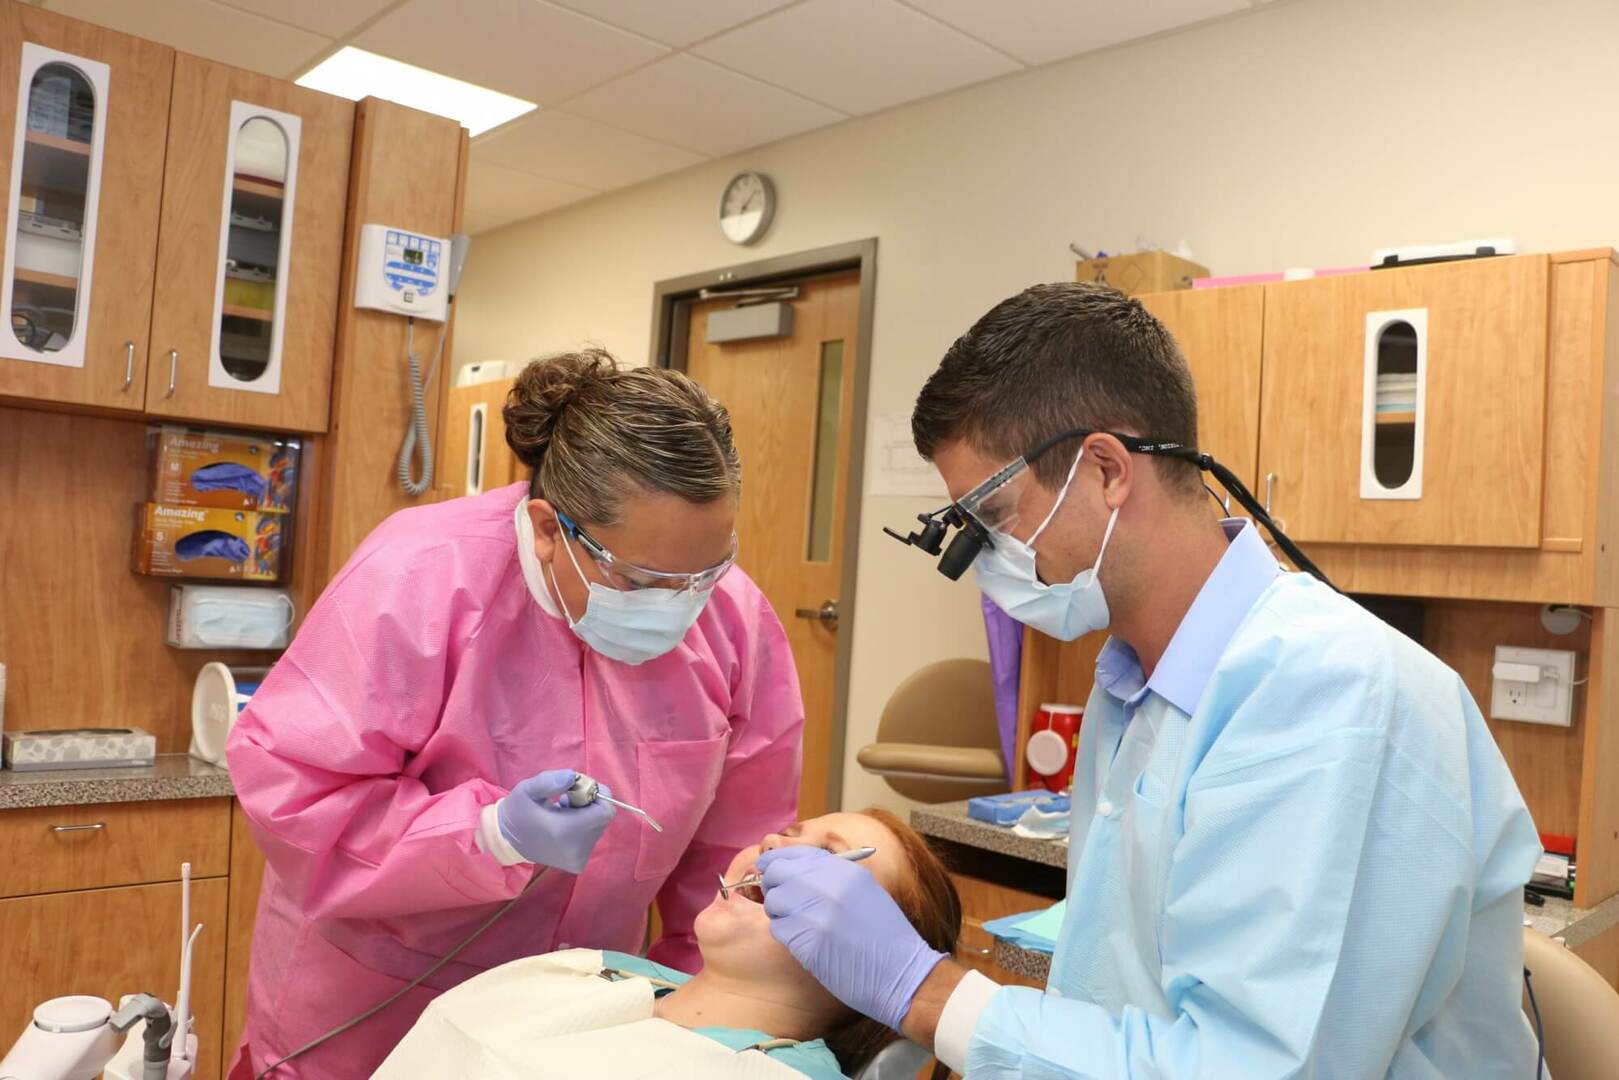 Dentist and his assistant working in patients mouth